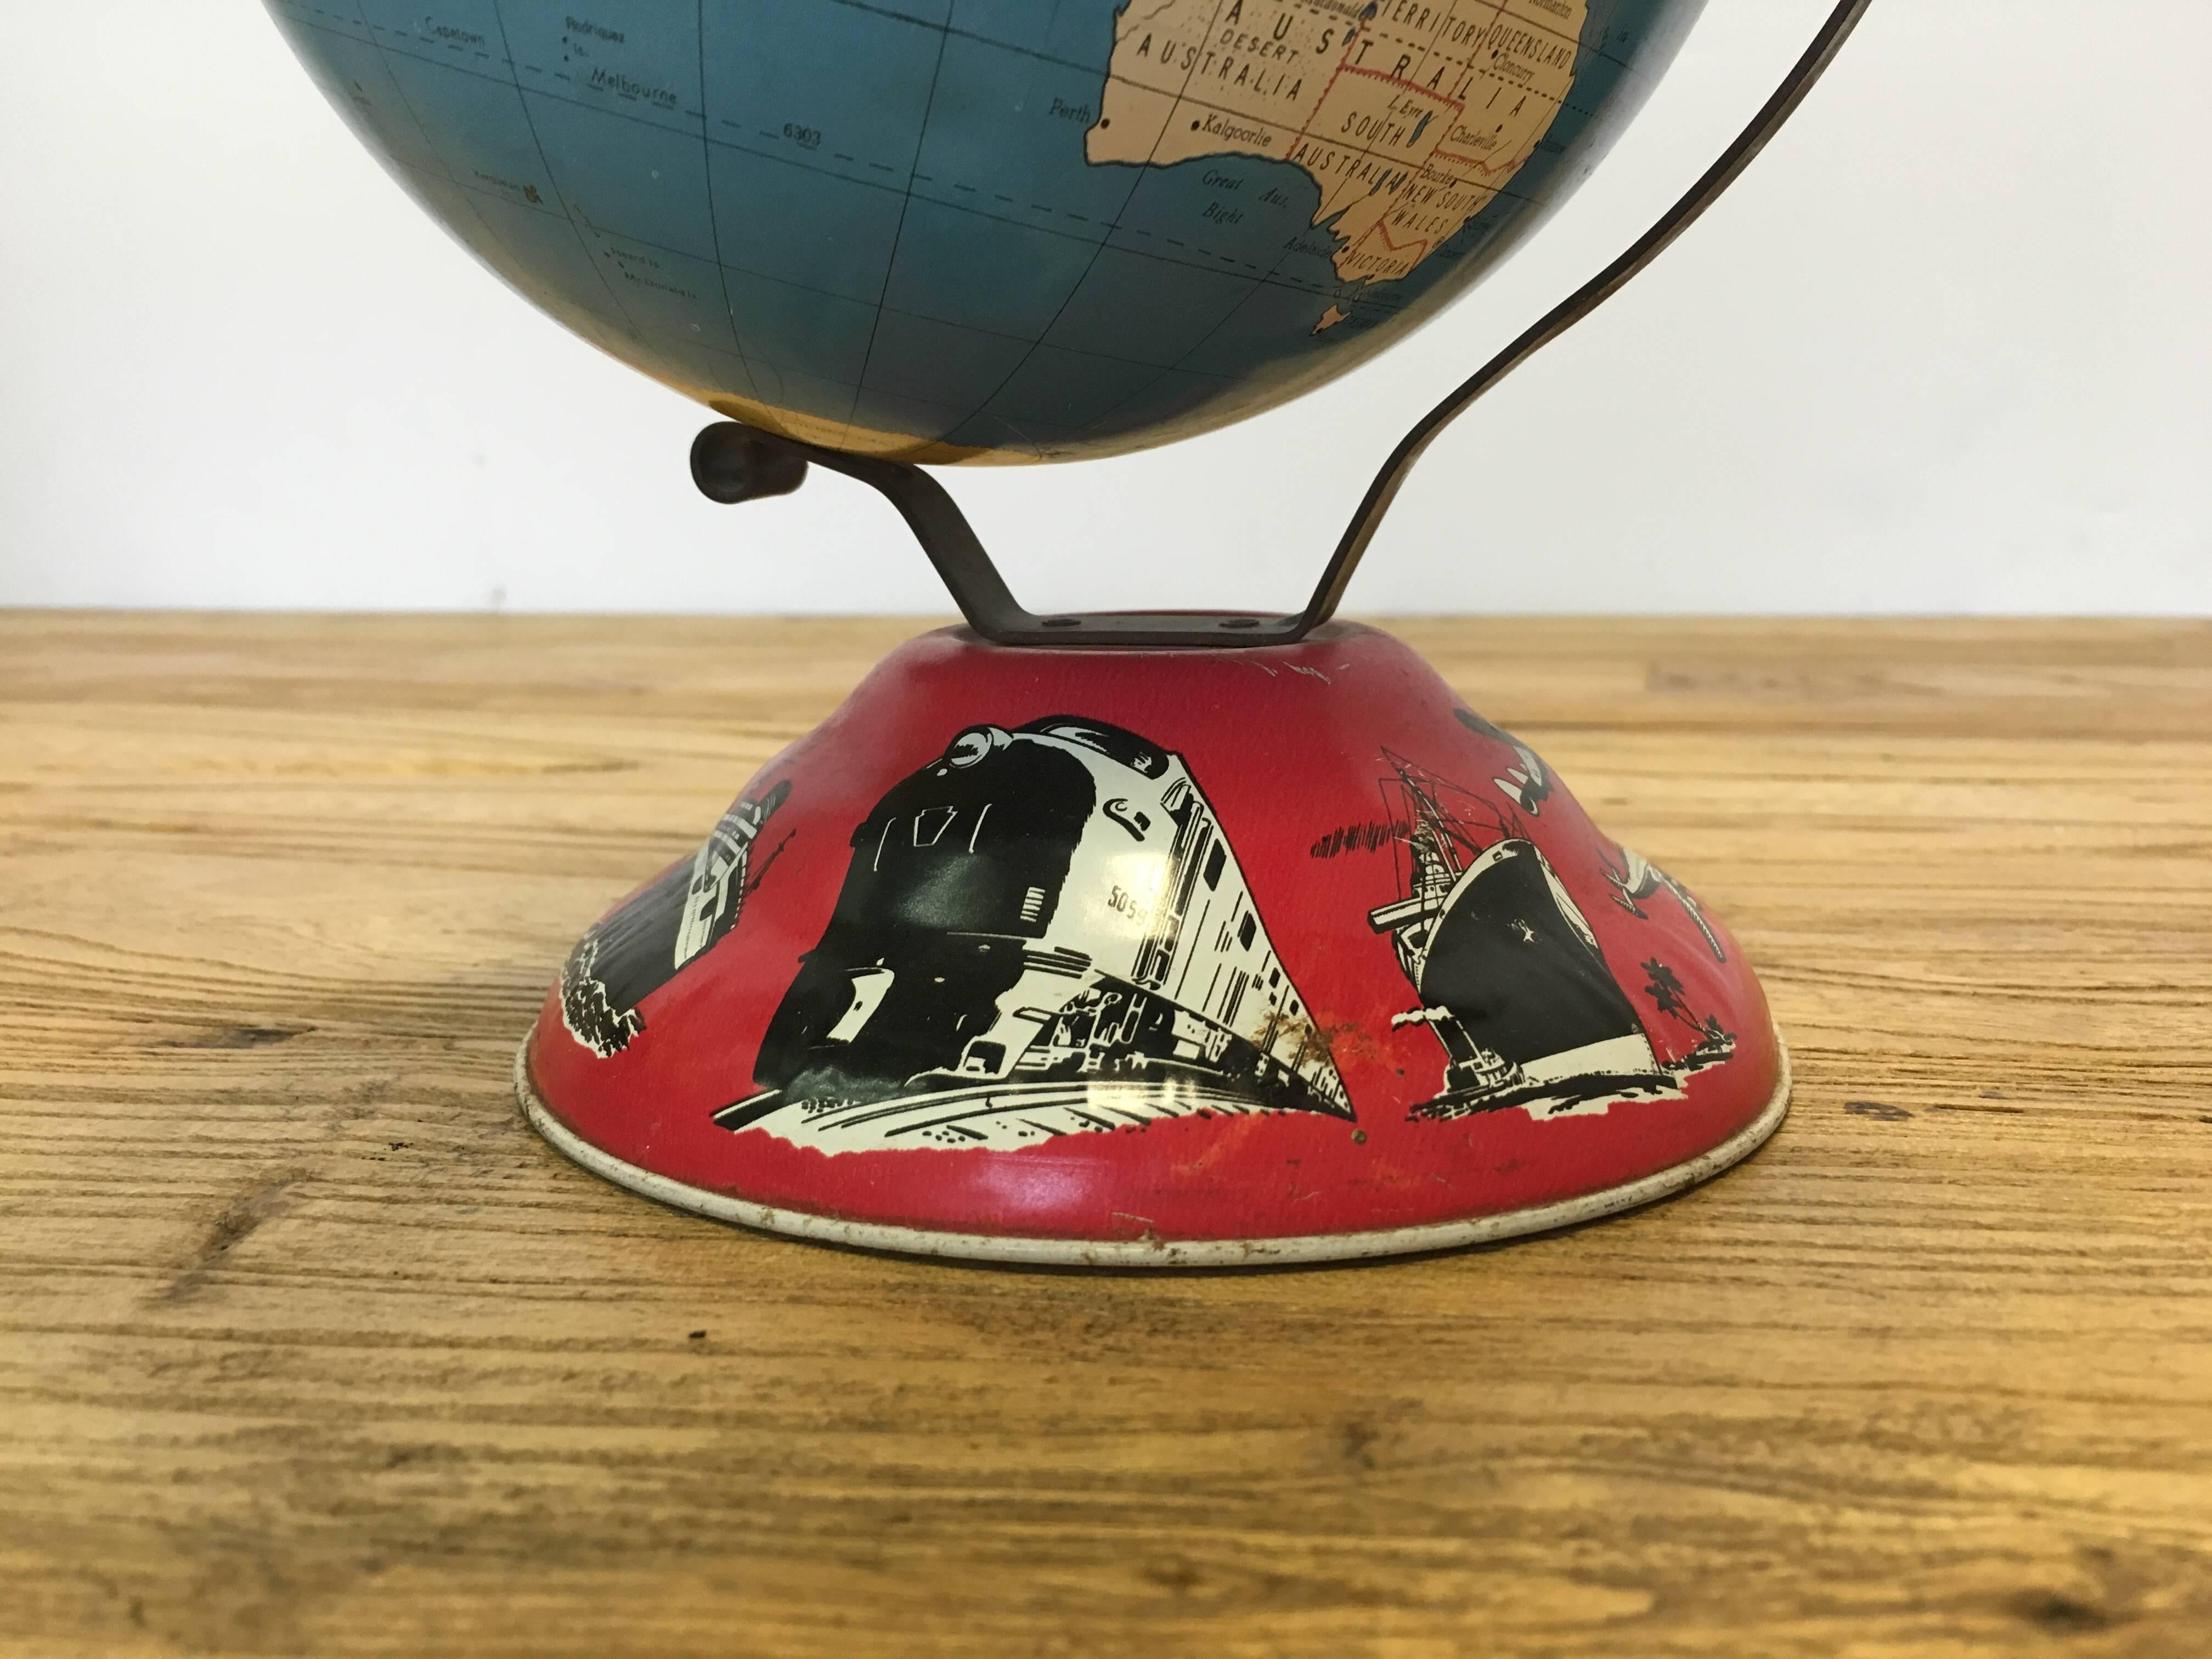 Mid-Century Ohio Arts tin globe with transportation imagery around the base. Freight train, steamer, buses, automobiles, planes, and trucks pictured.